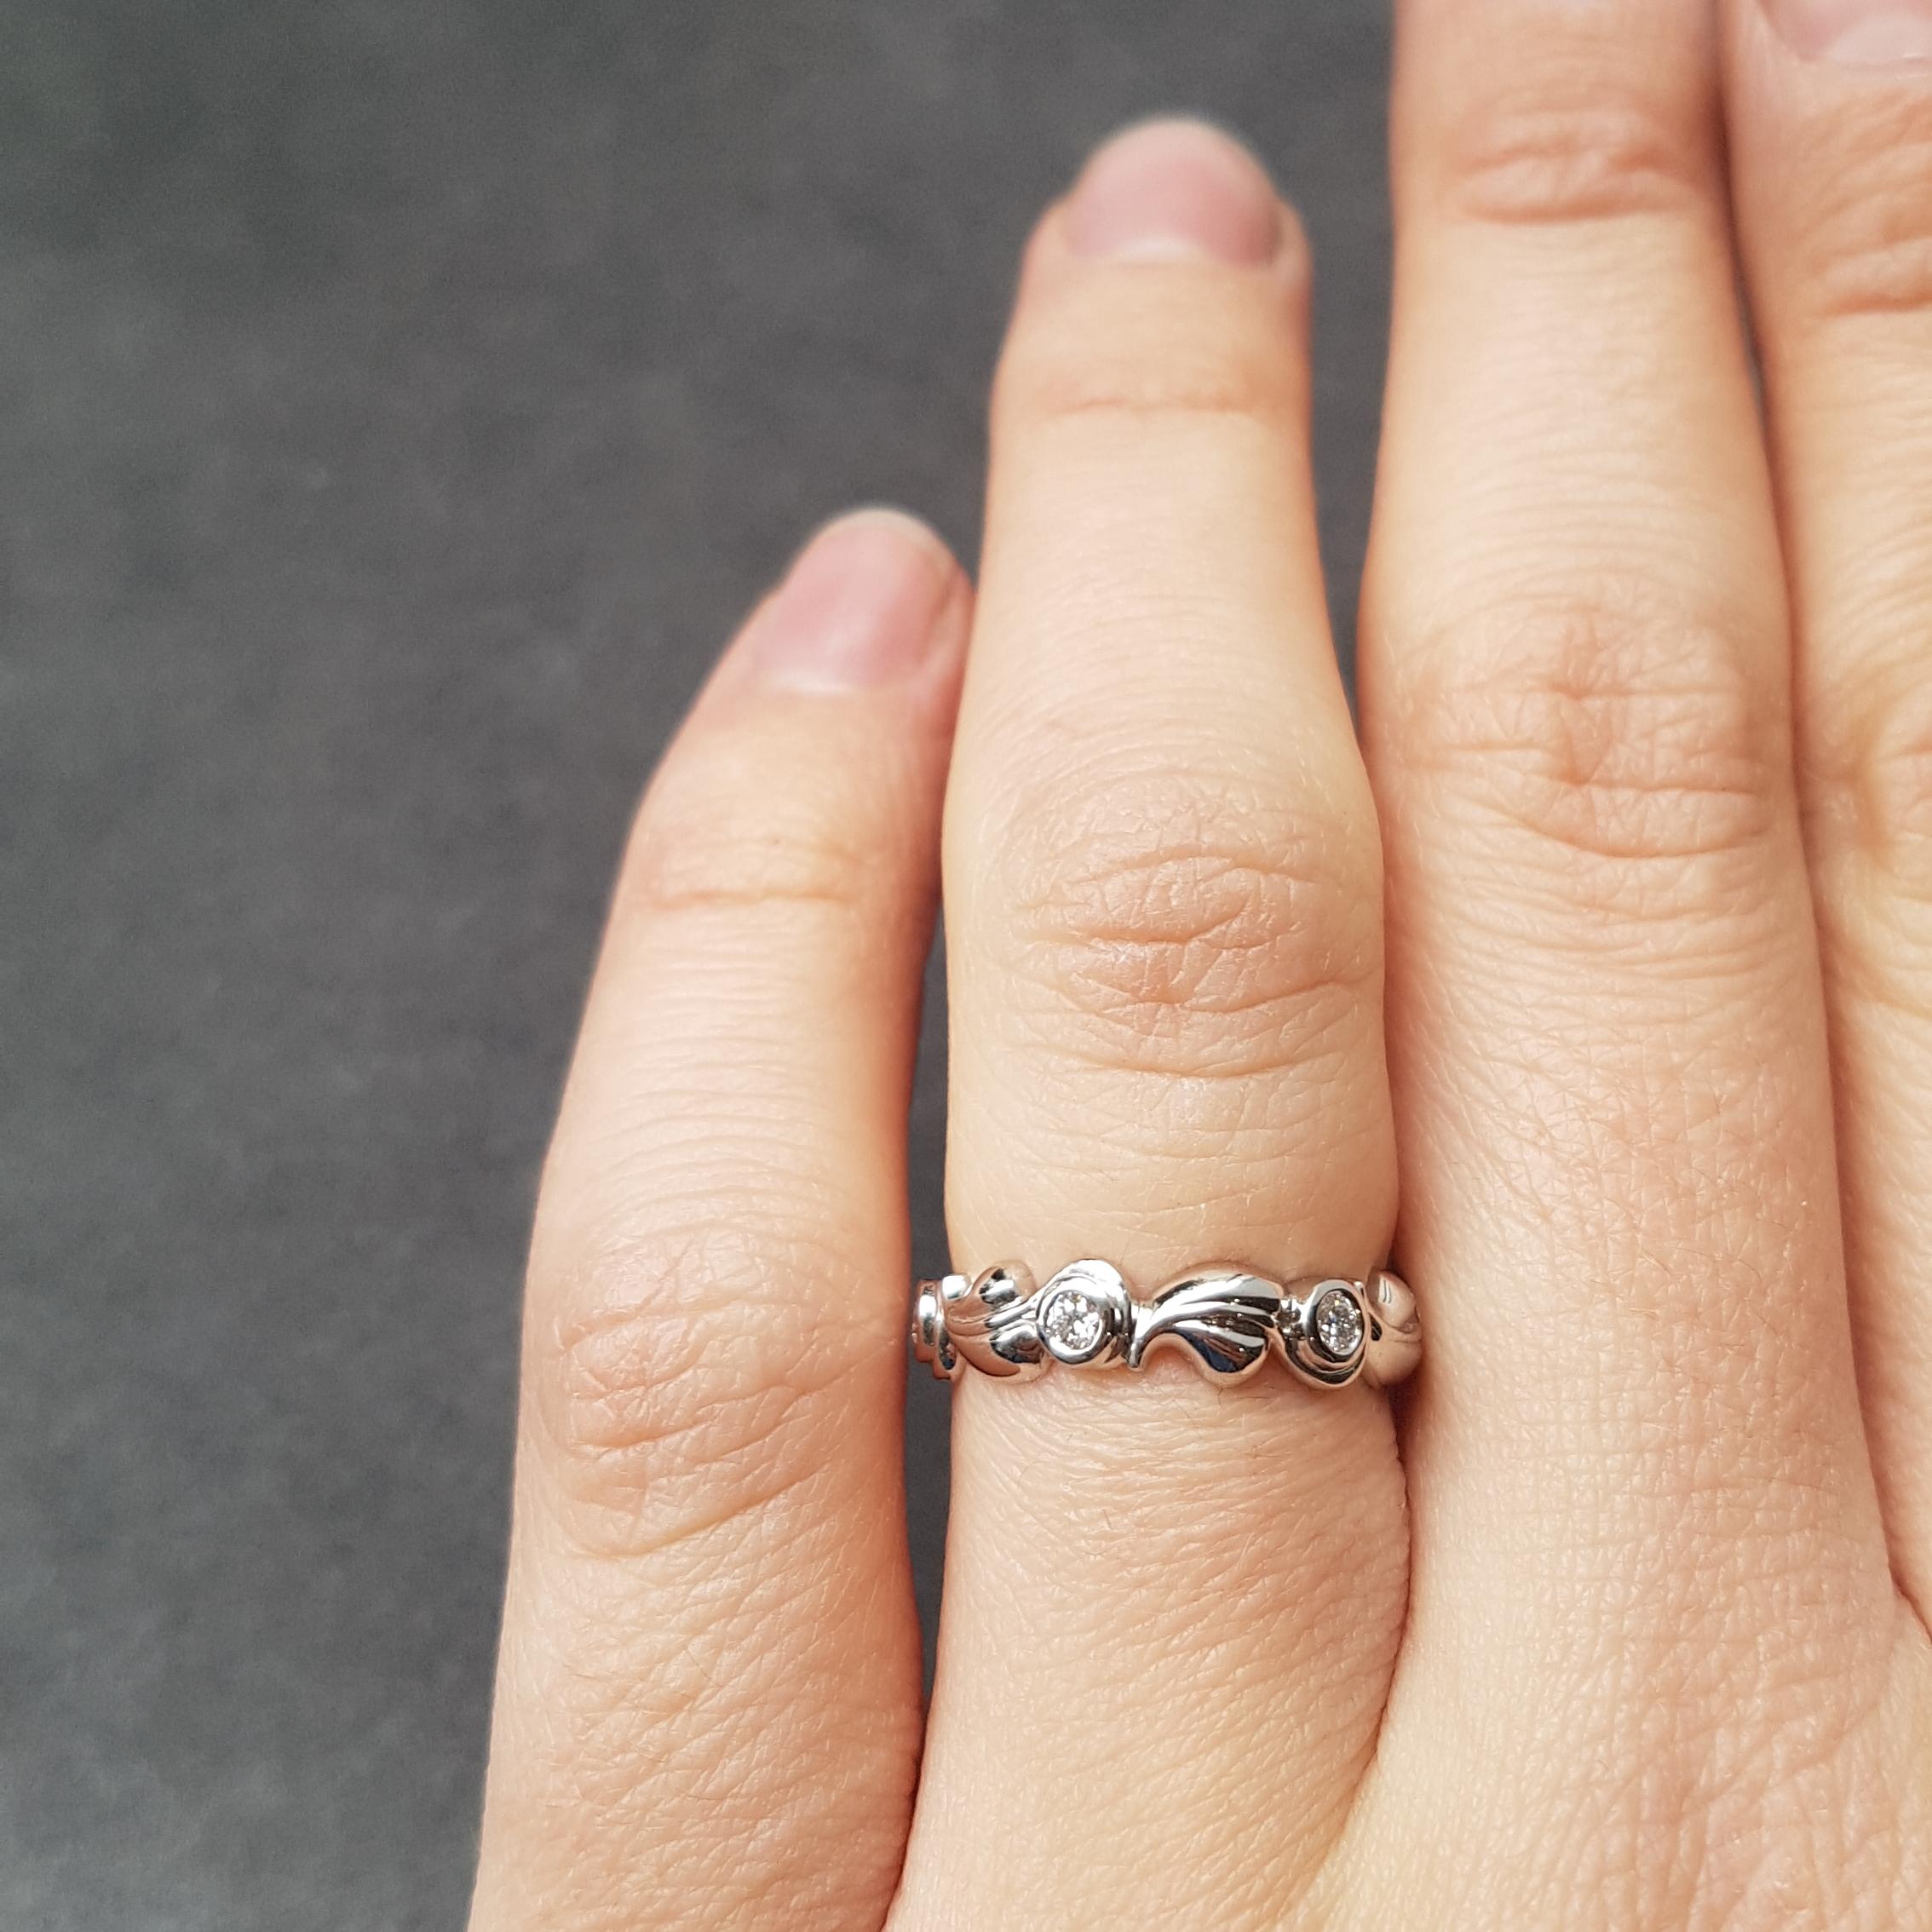 This delicate and sweet eternity ring is made in platinum. The leaf details are interspersed with six white diamonds.

Timeless natural beauty, the Grace band is a charming eternity ring when worn solo, but can be a more creative statement when